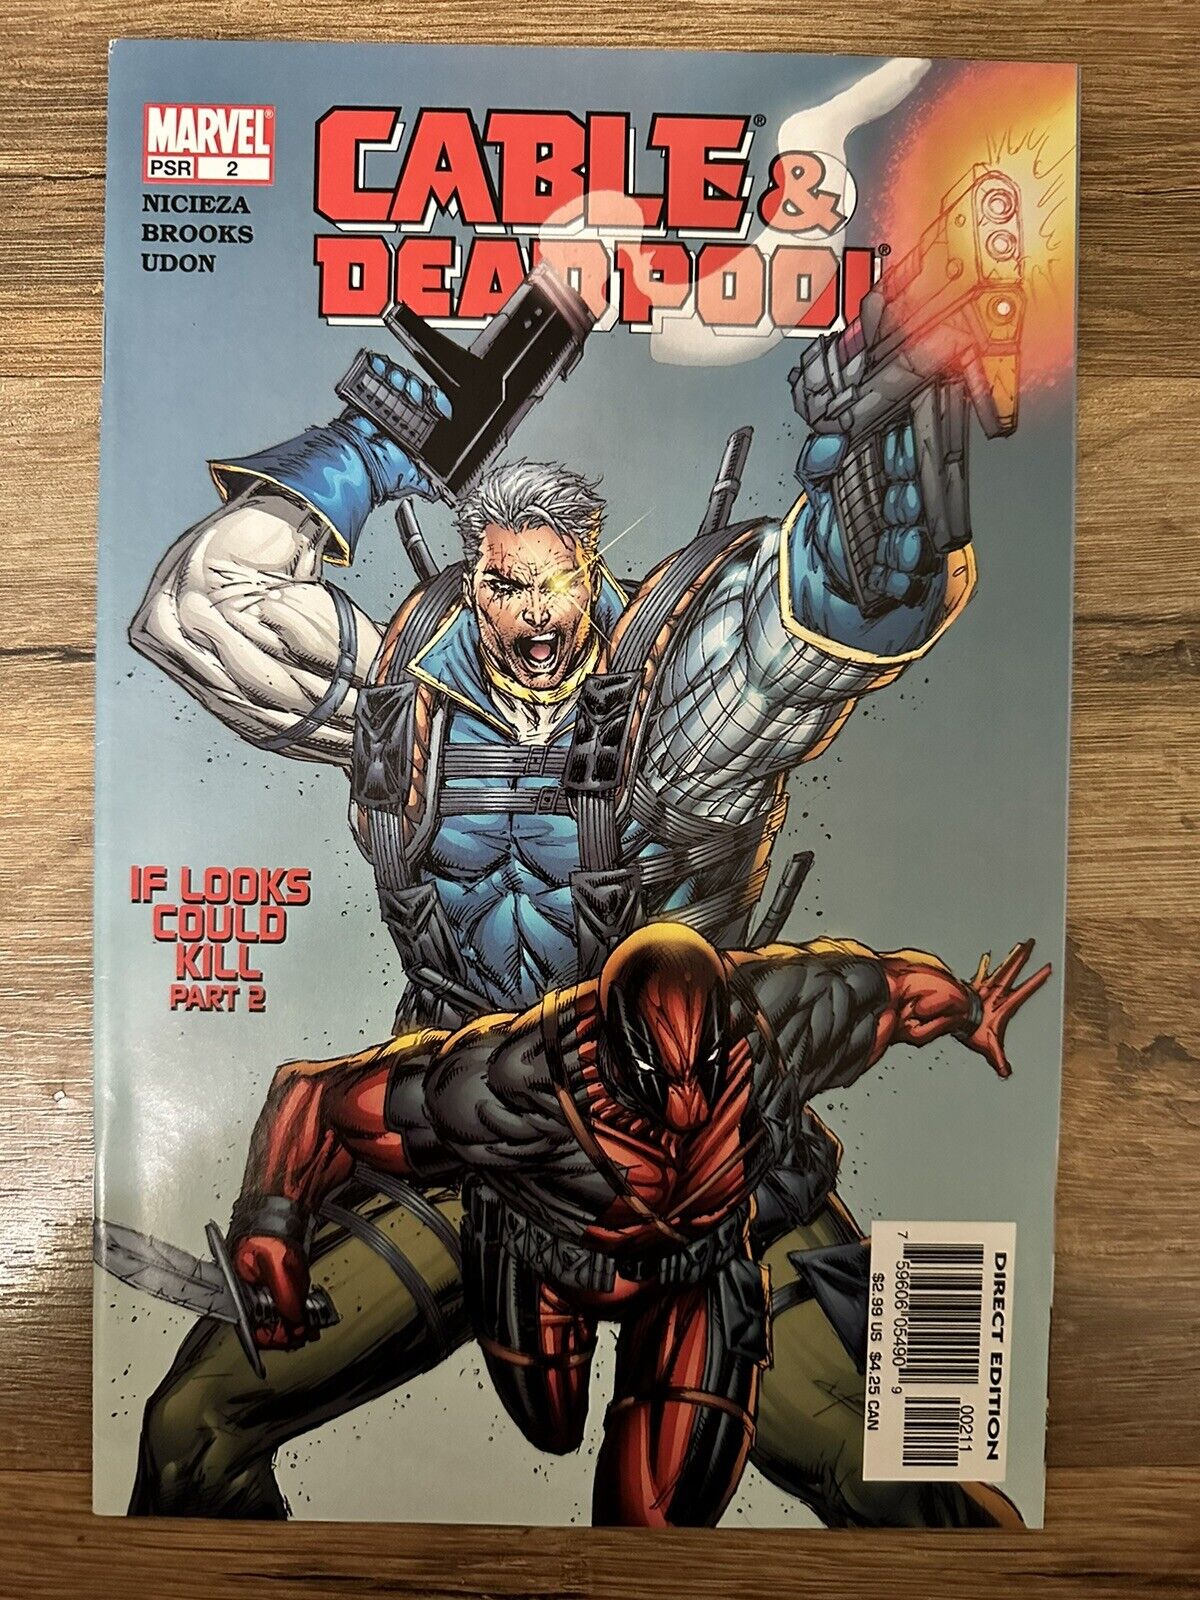 CABLE And DEADPOOL #2 (2004) NM - ROB LIEFELD COVER - FIRST PRINT